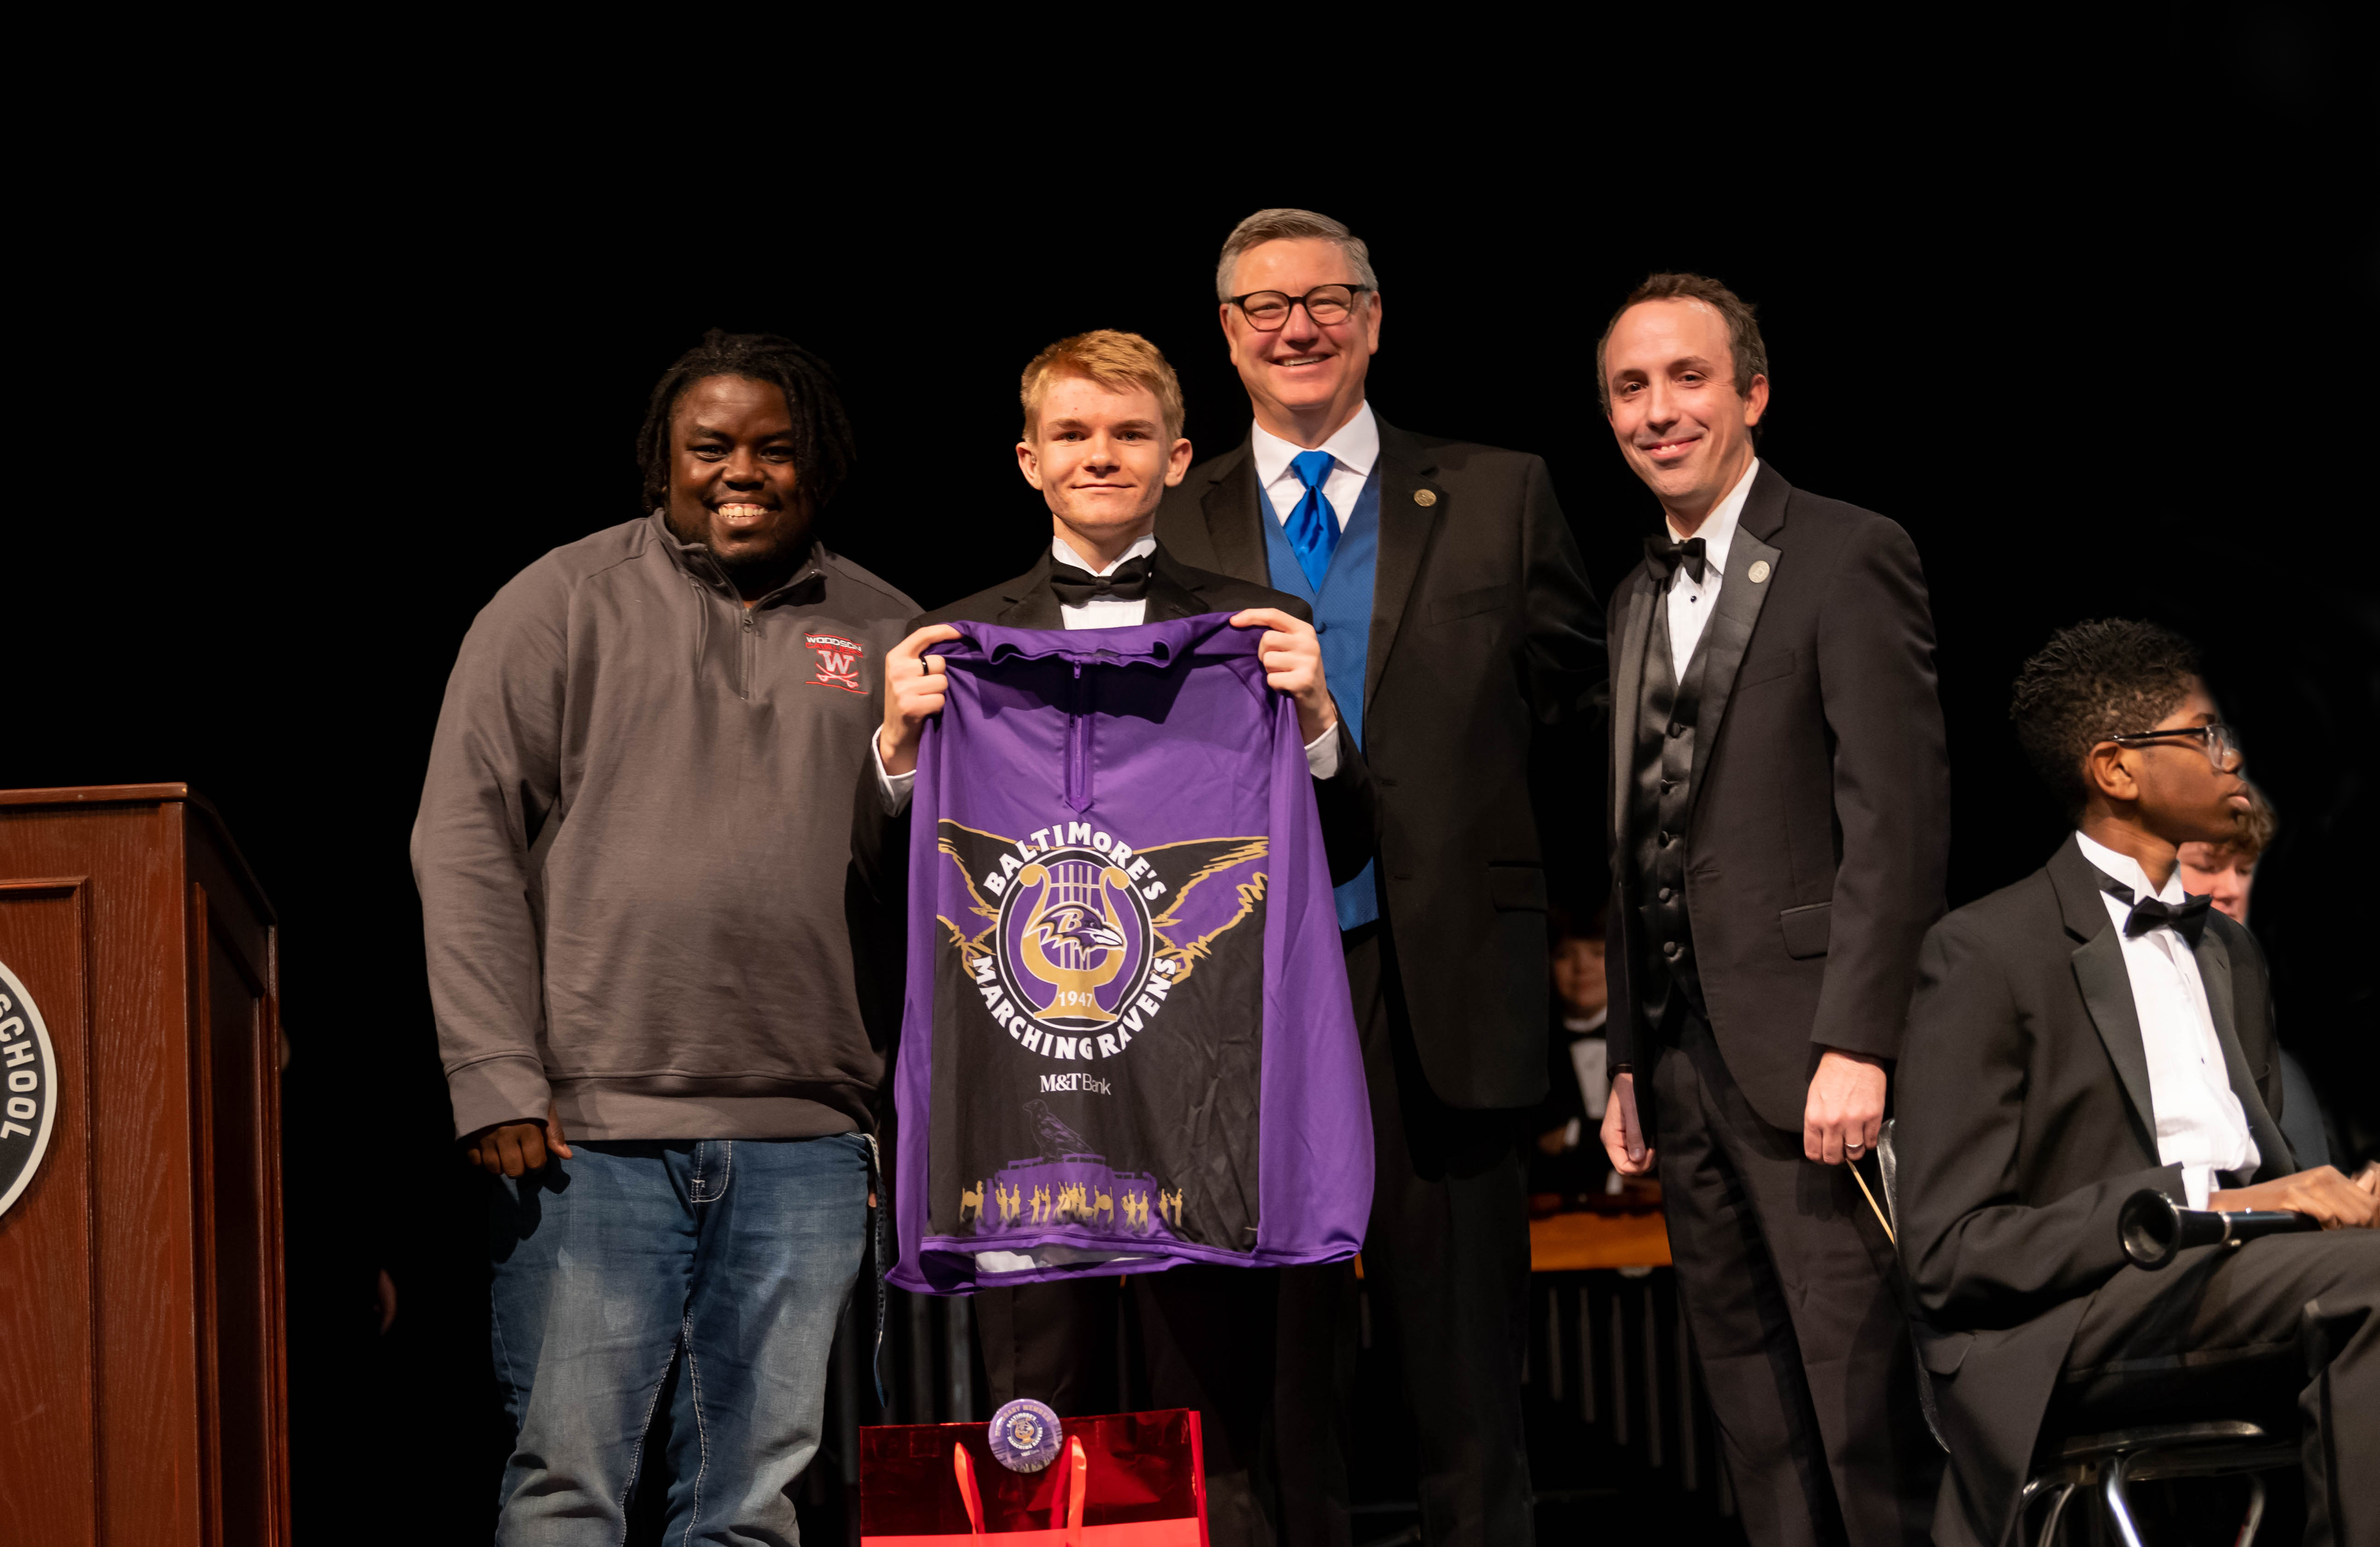 Michael received a gift from the Baltimore Marching Ravens.